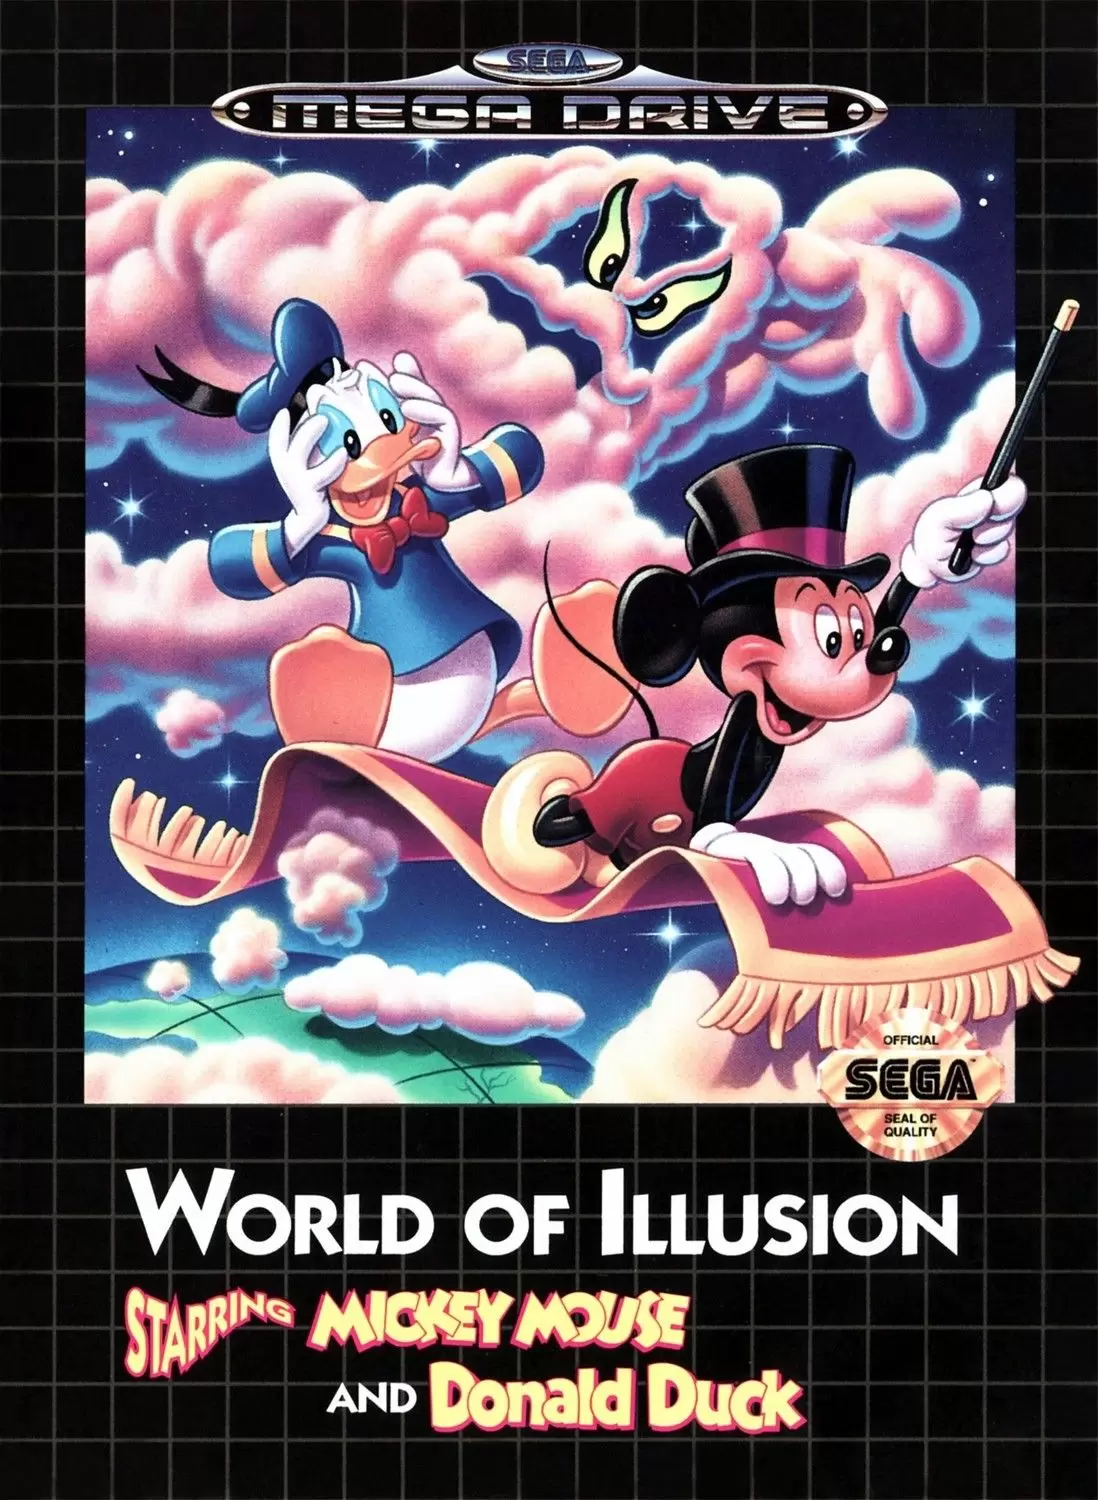 Sega Genesis Games - World of Illusion Starring Mickey Mouse and Donald Duck